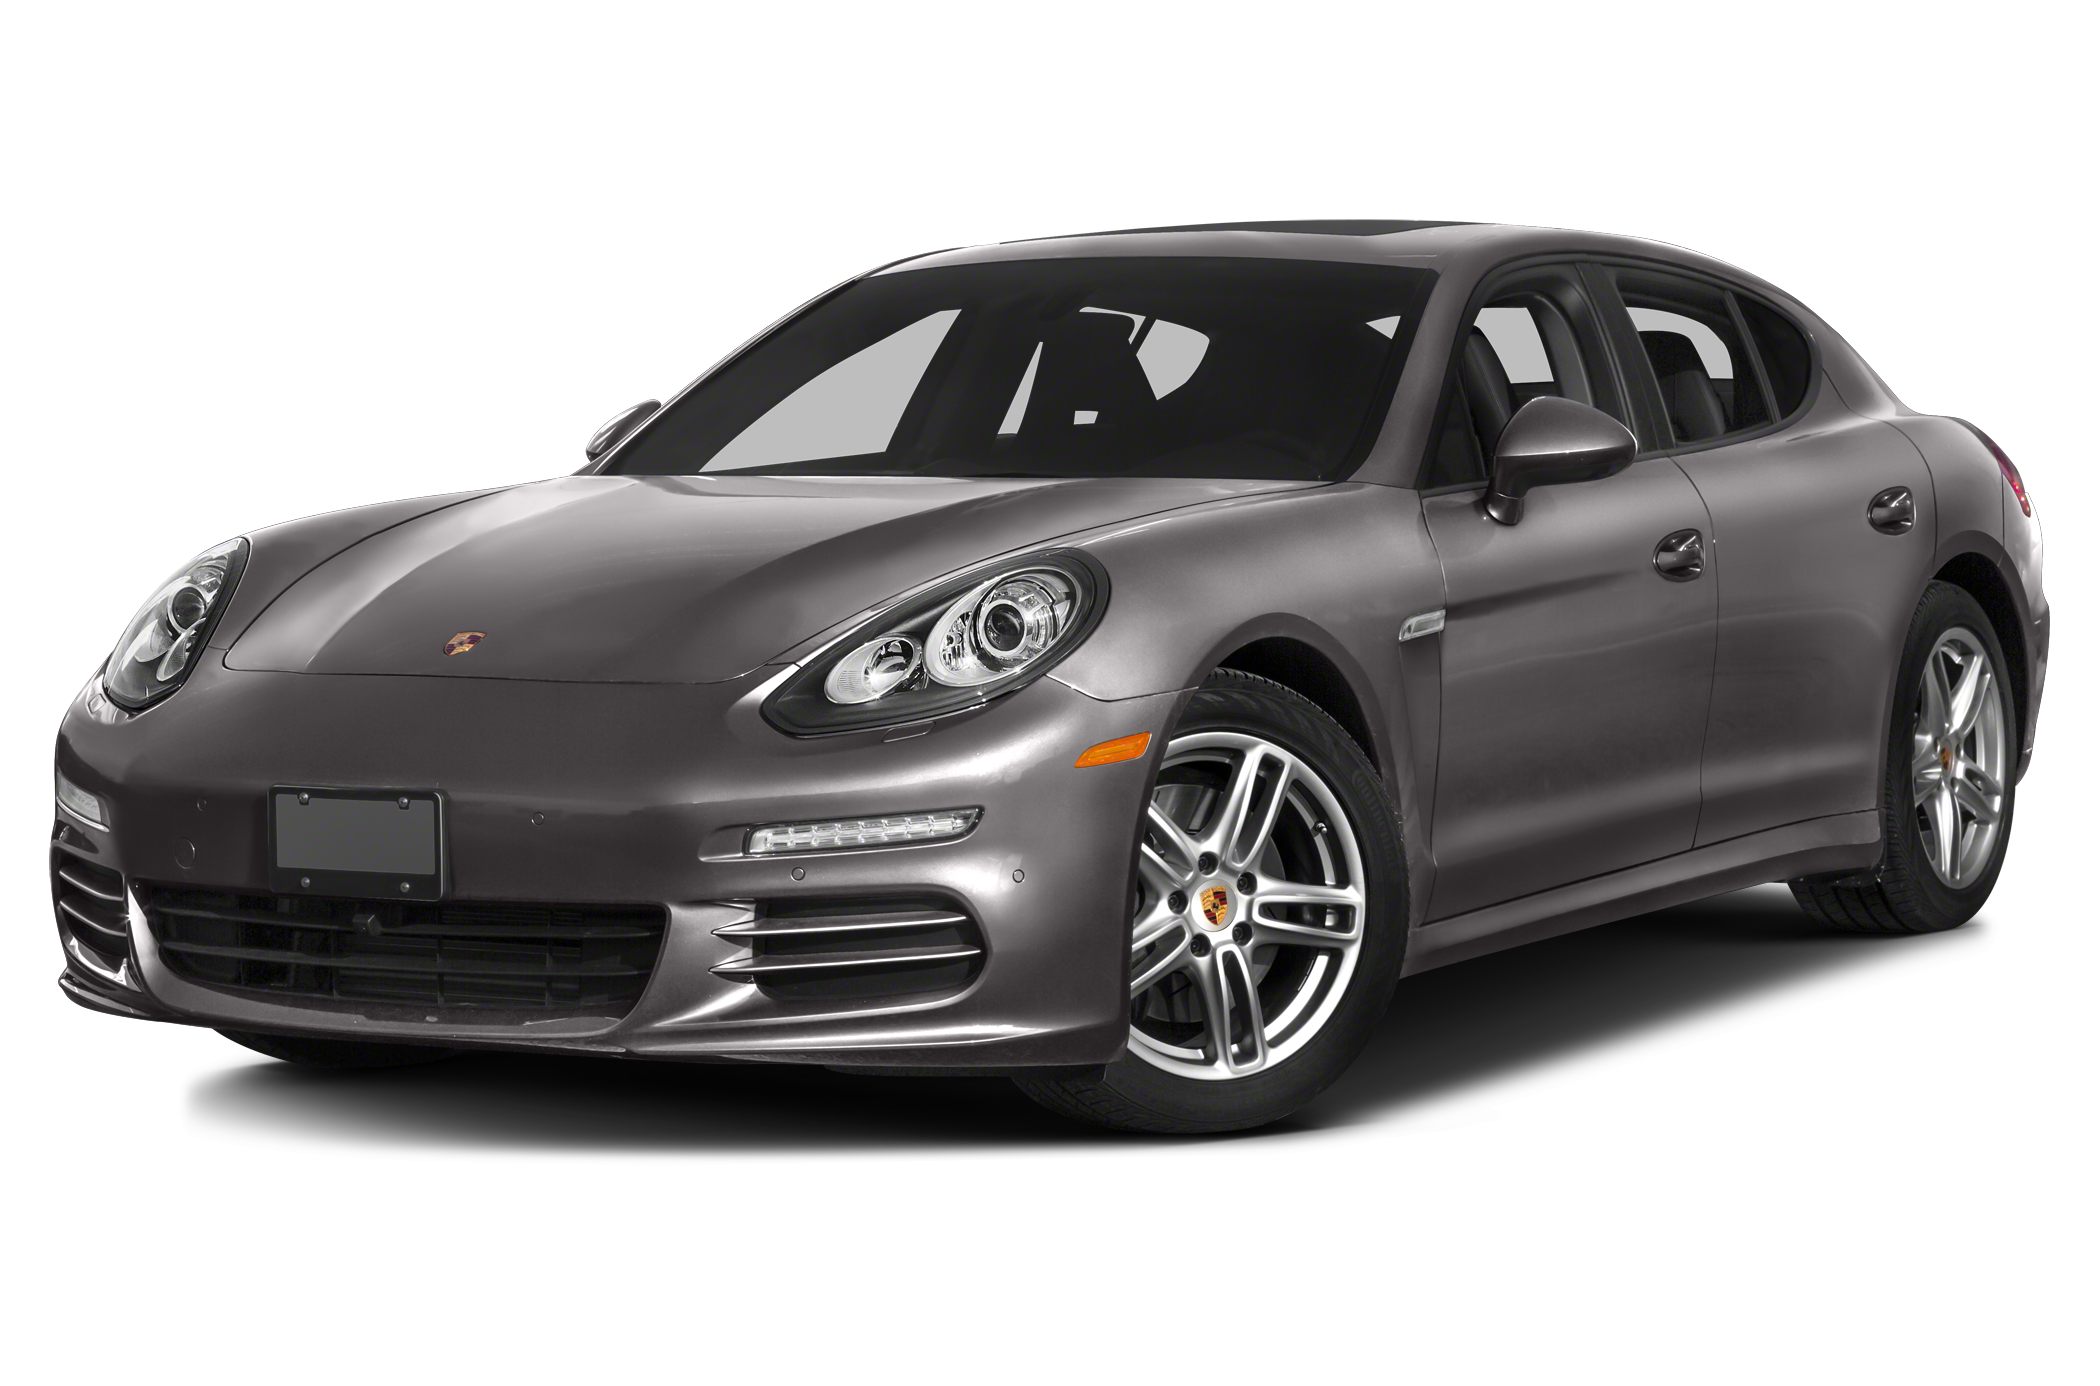 The Best Porsche Cars for Sale in Bahrain